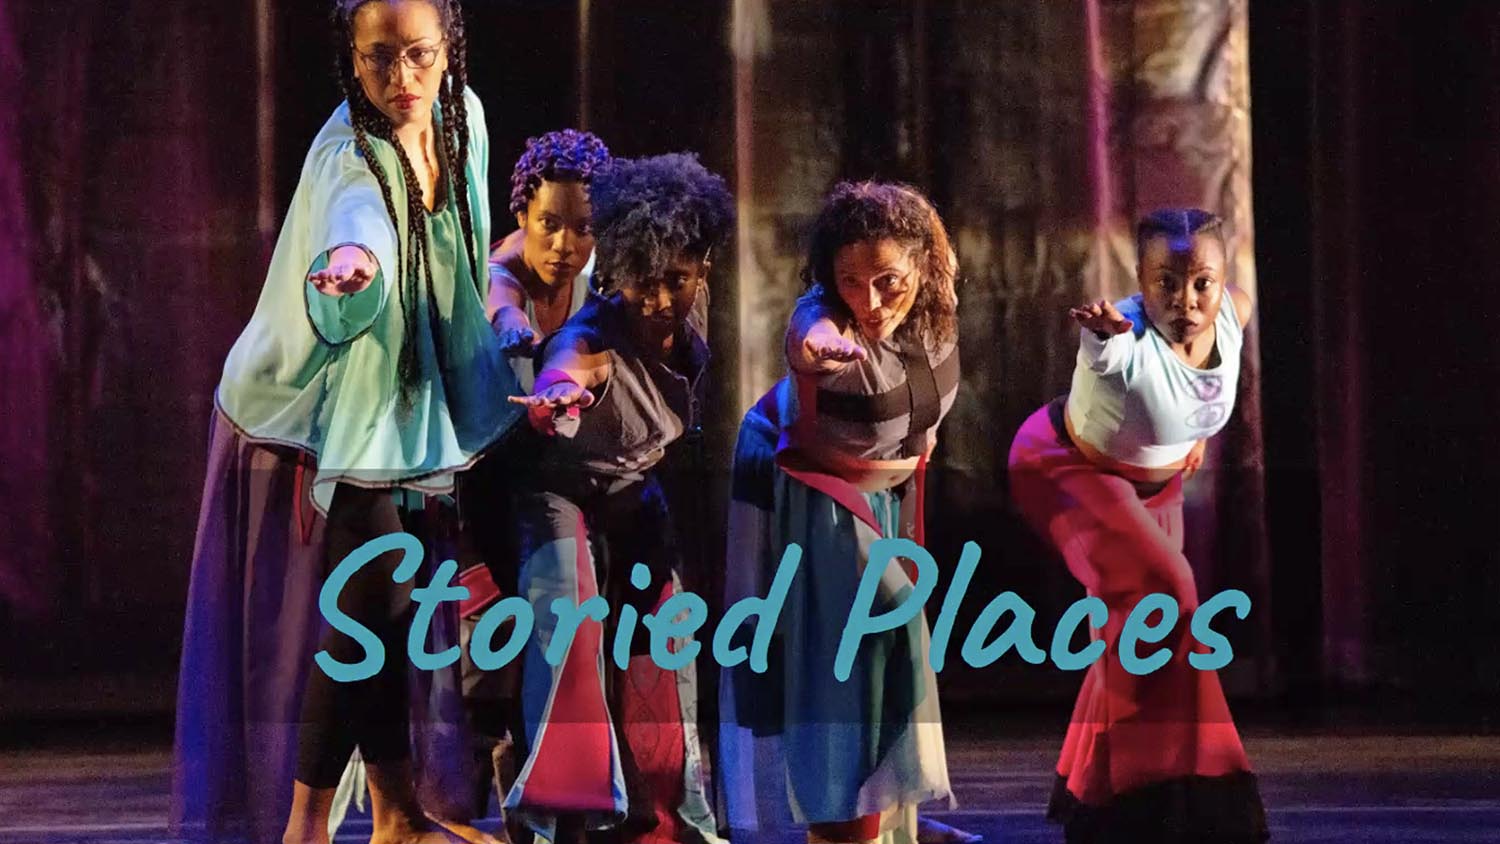 Their project, "Storied Places" initially explored the stories of how their own families migrated from the south to the north. In time, the project evolved into science-fiction, where the characters envisioned themself in the future. 